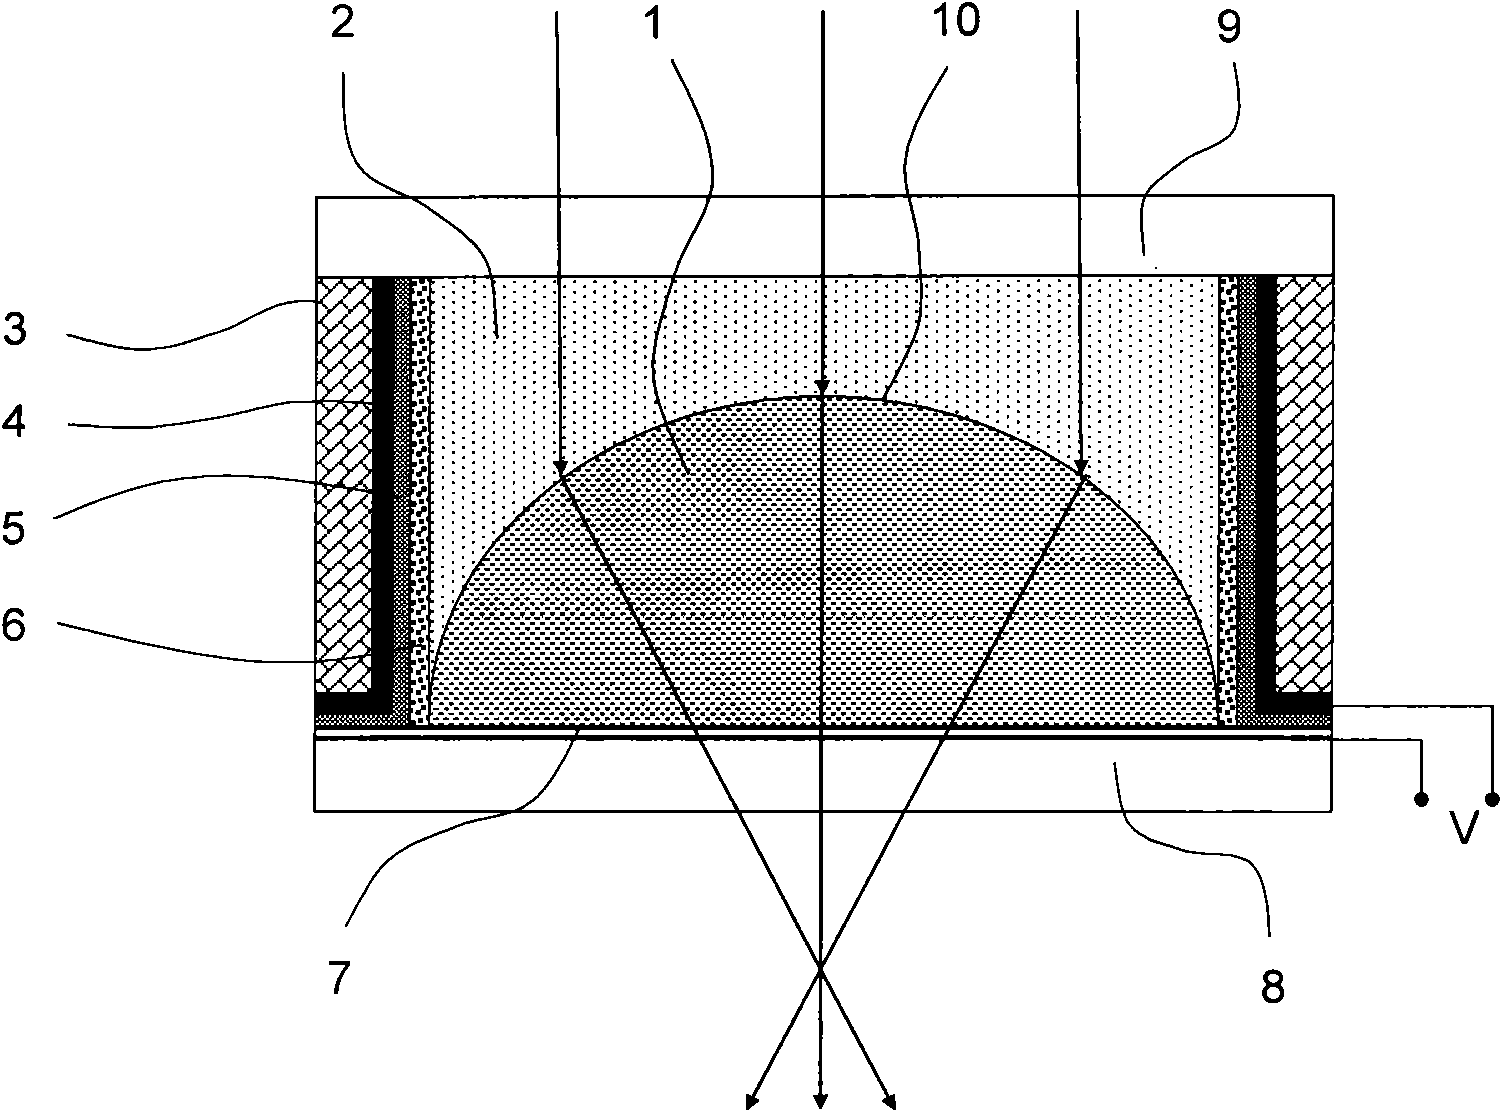 Electrowetting zoom lens based on ion liquid